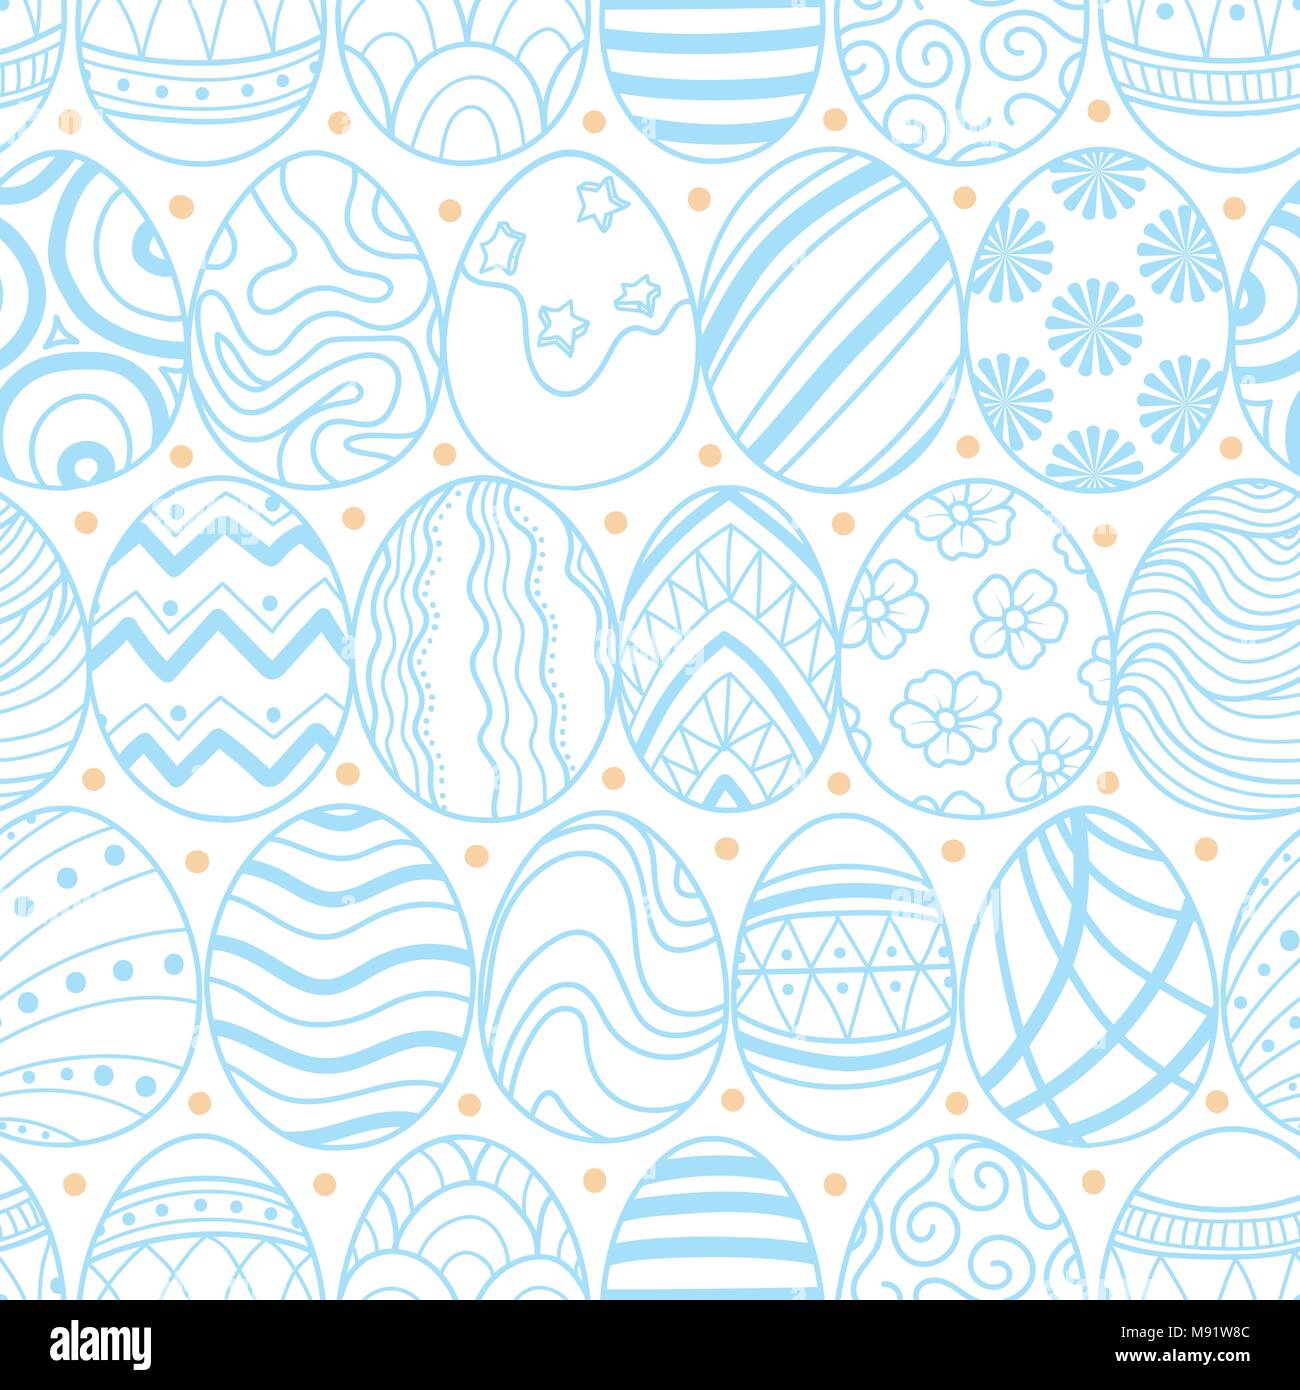 Easter eggs in pastel blue outline pink dots line up on white background. Cute hand drawn seamless pattern design for Easter festival in vector illust Stock Vector